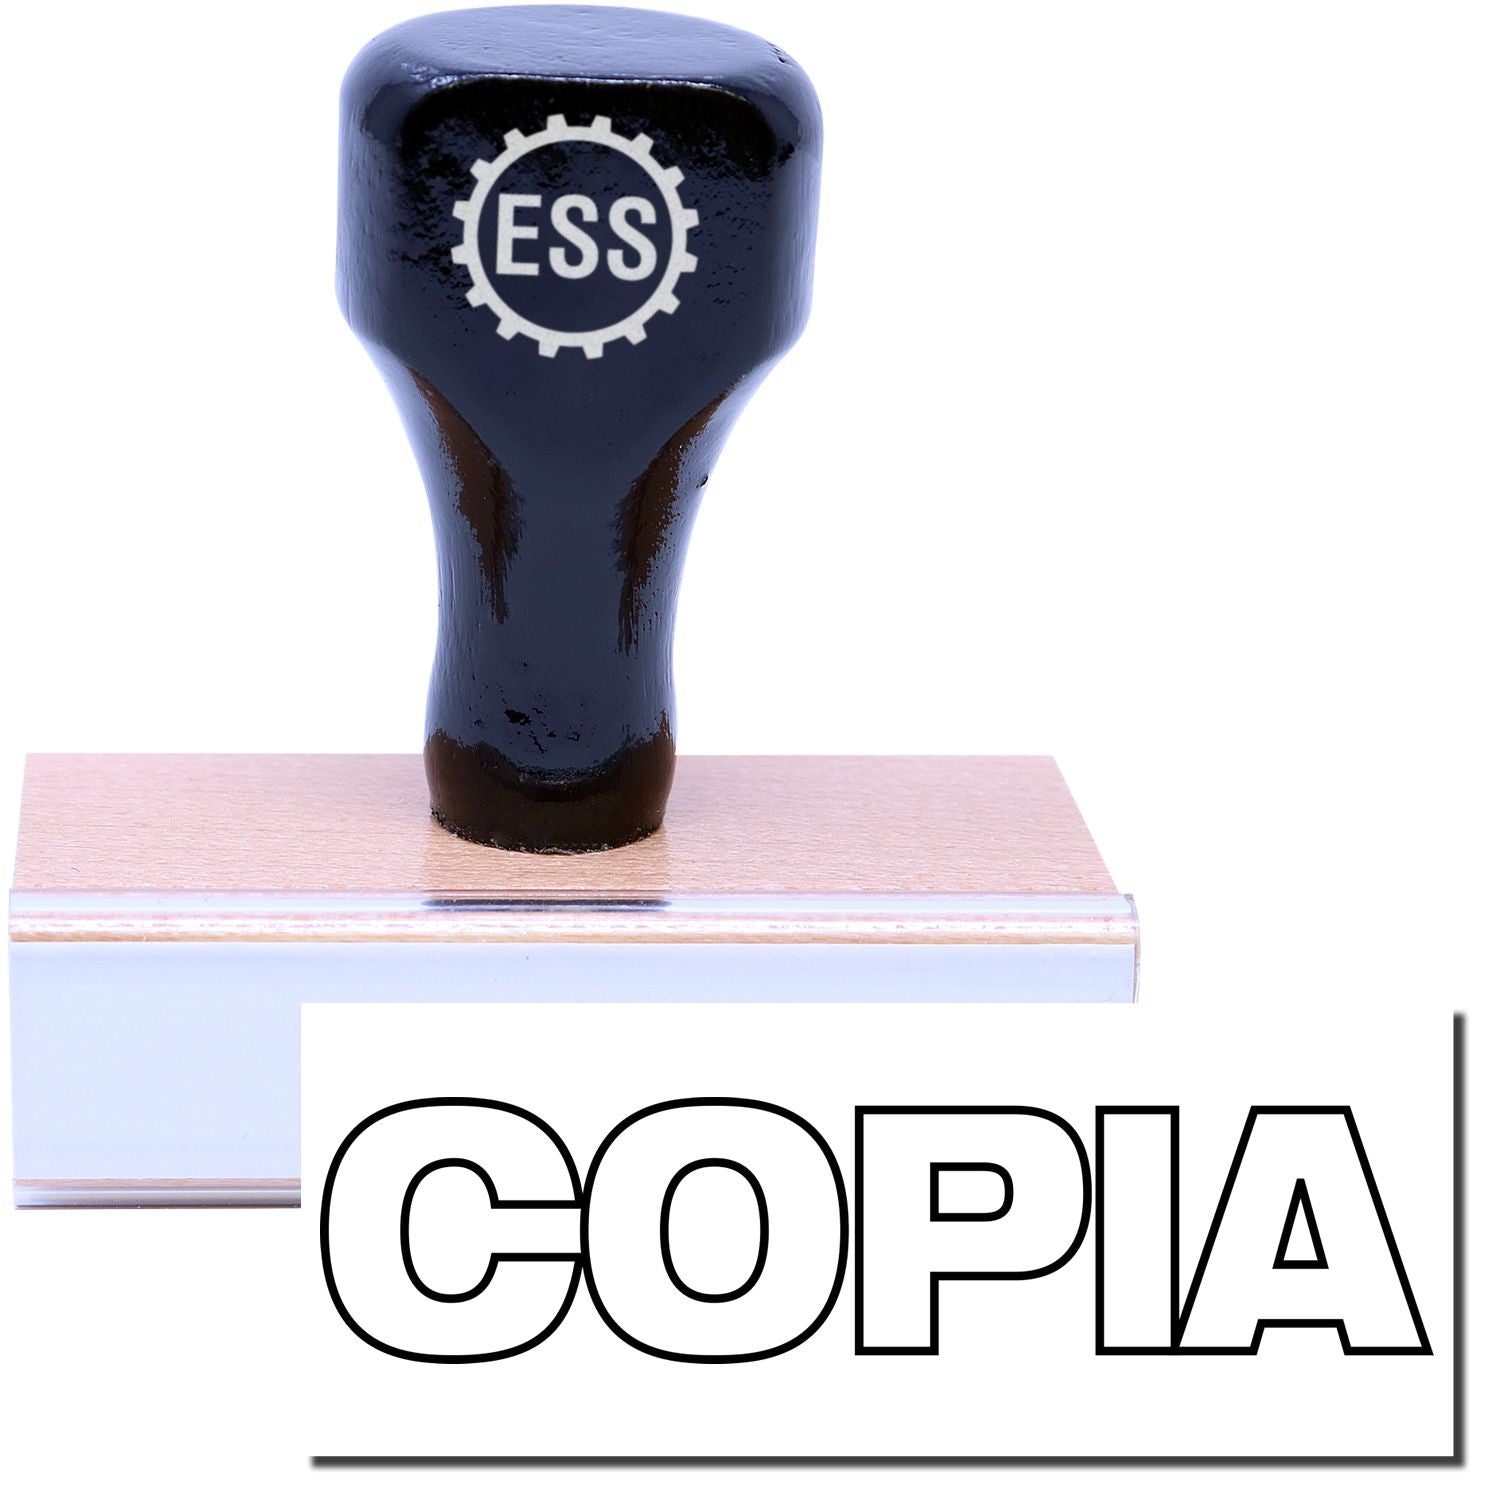 A stock office rubber stamp with a stamped image showing how the text "COPIA" in an outline font is displayed after stamping.